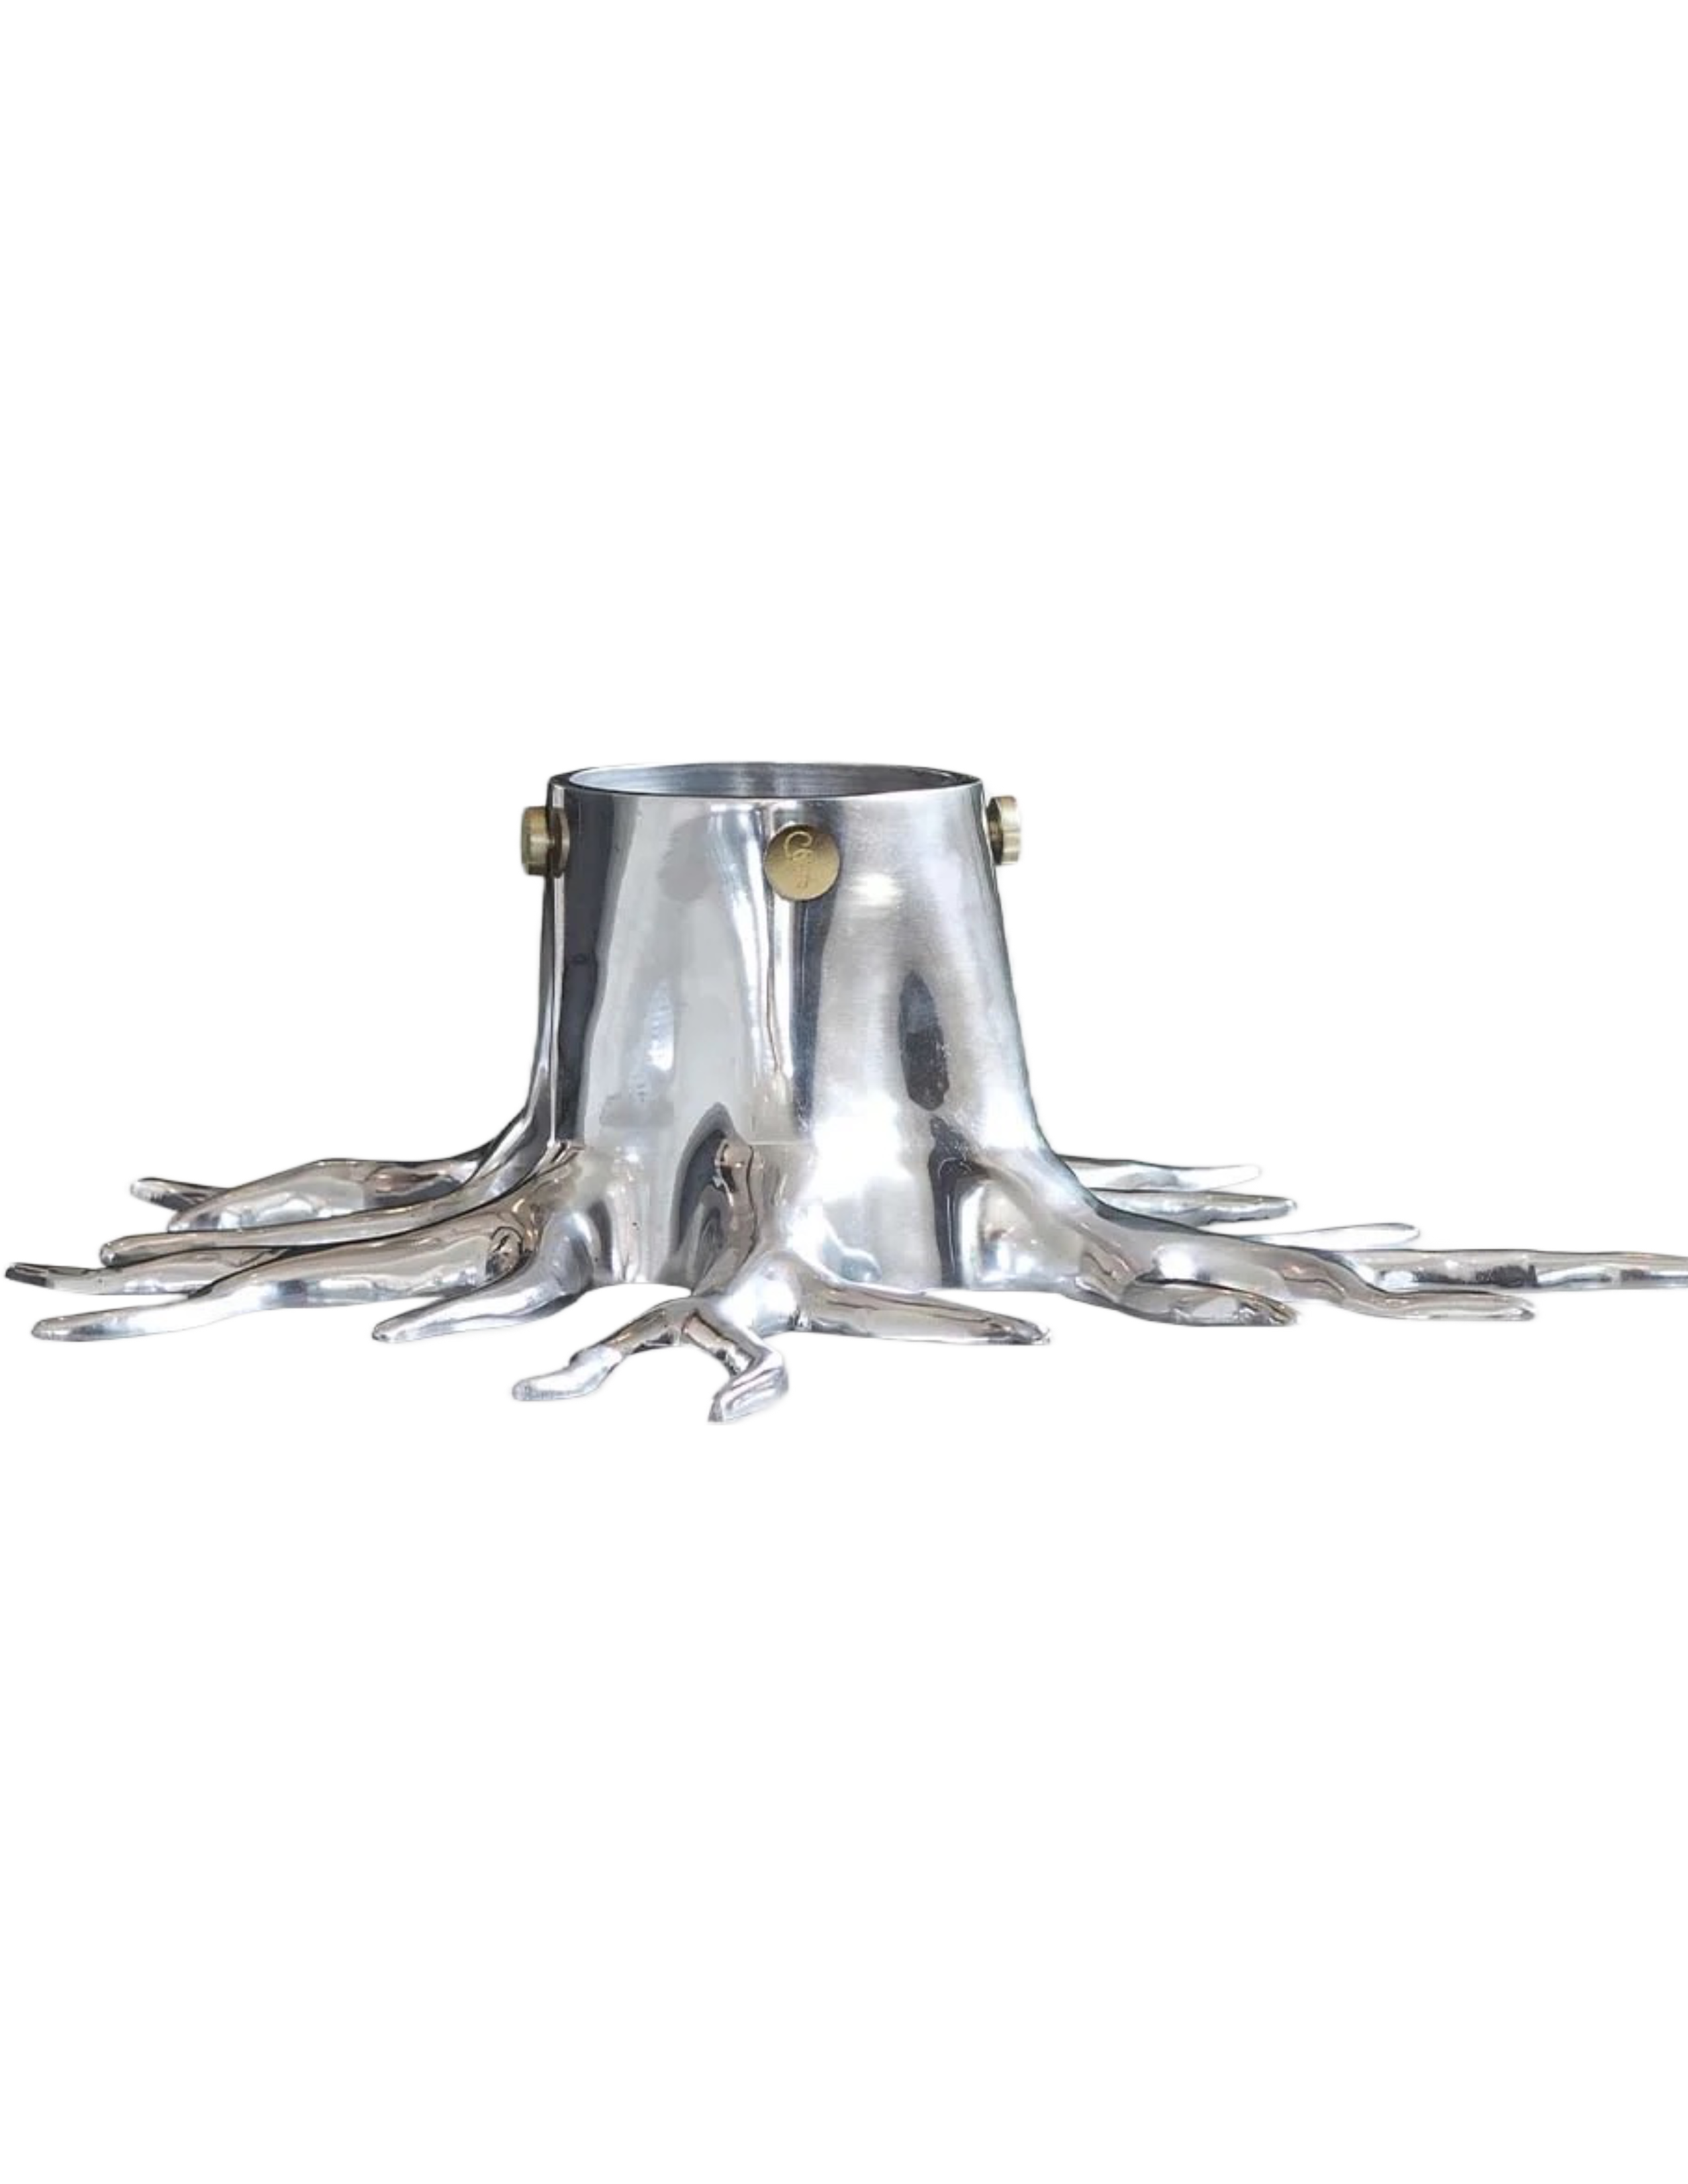 Christmas Tree Stand "The Root" - Silver